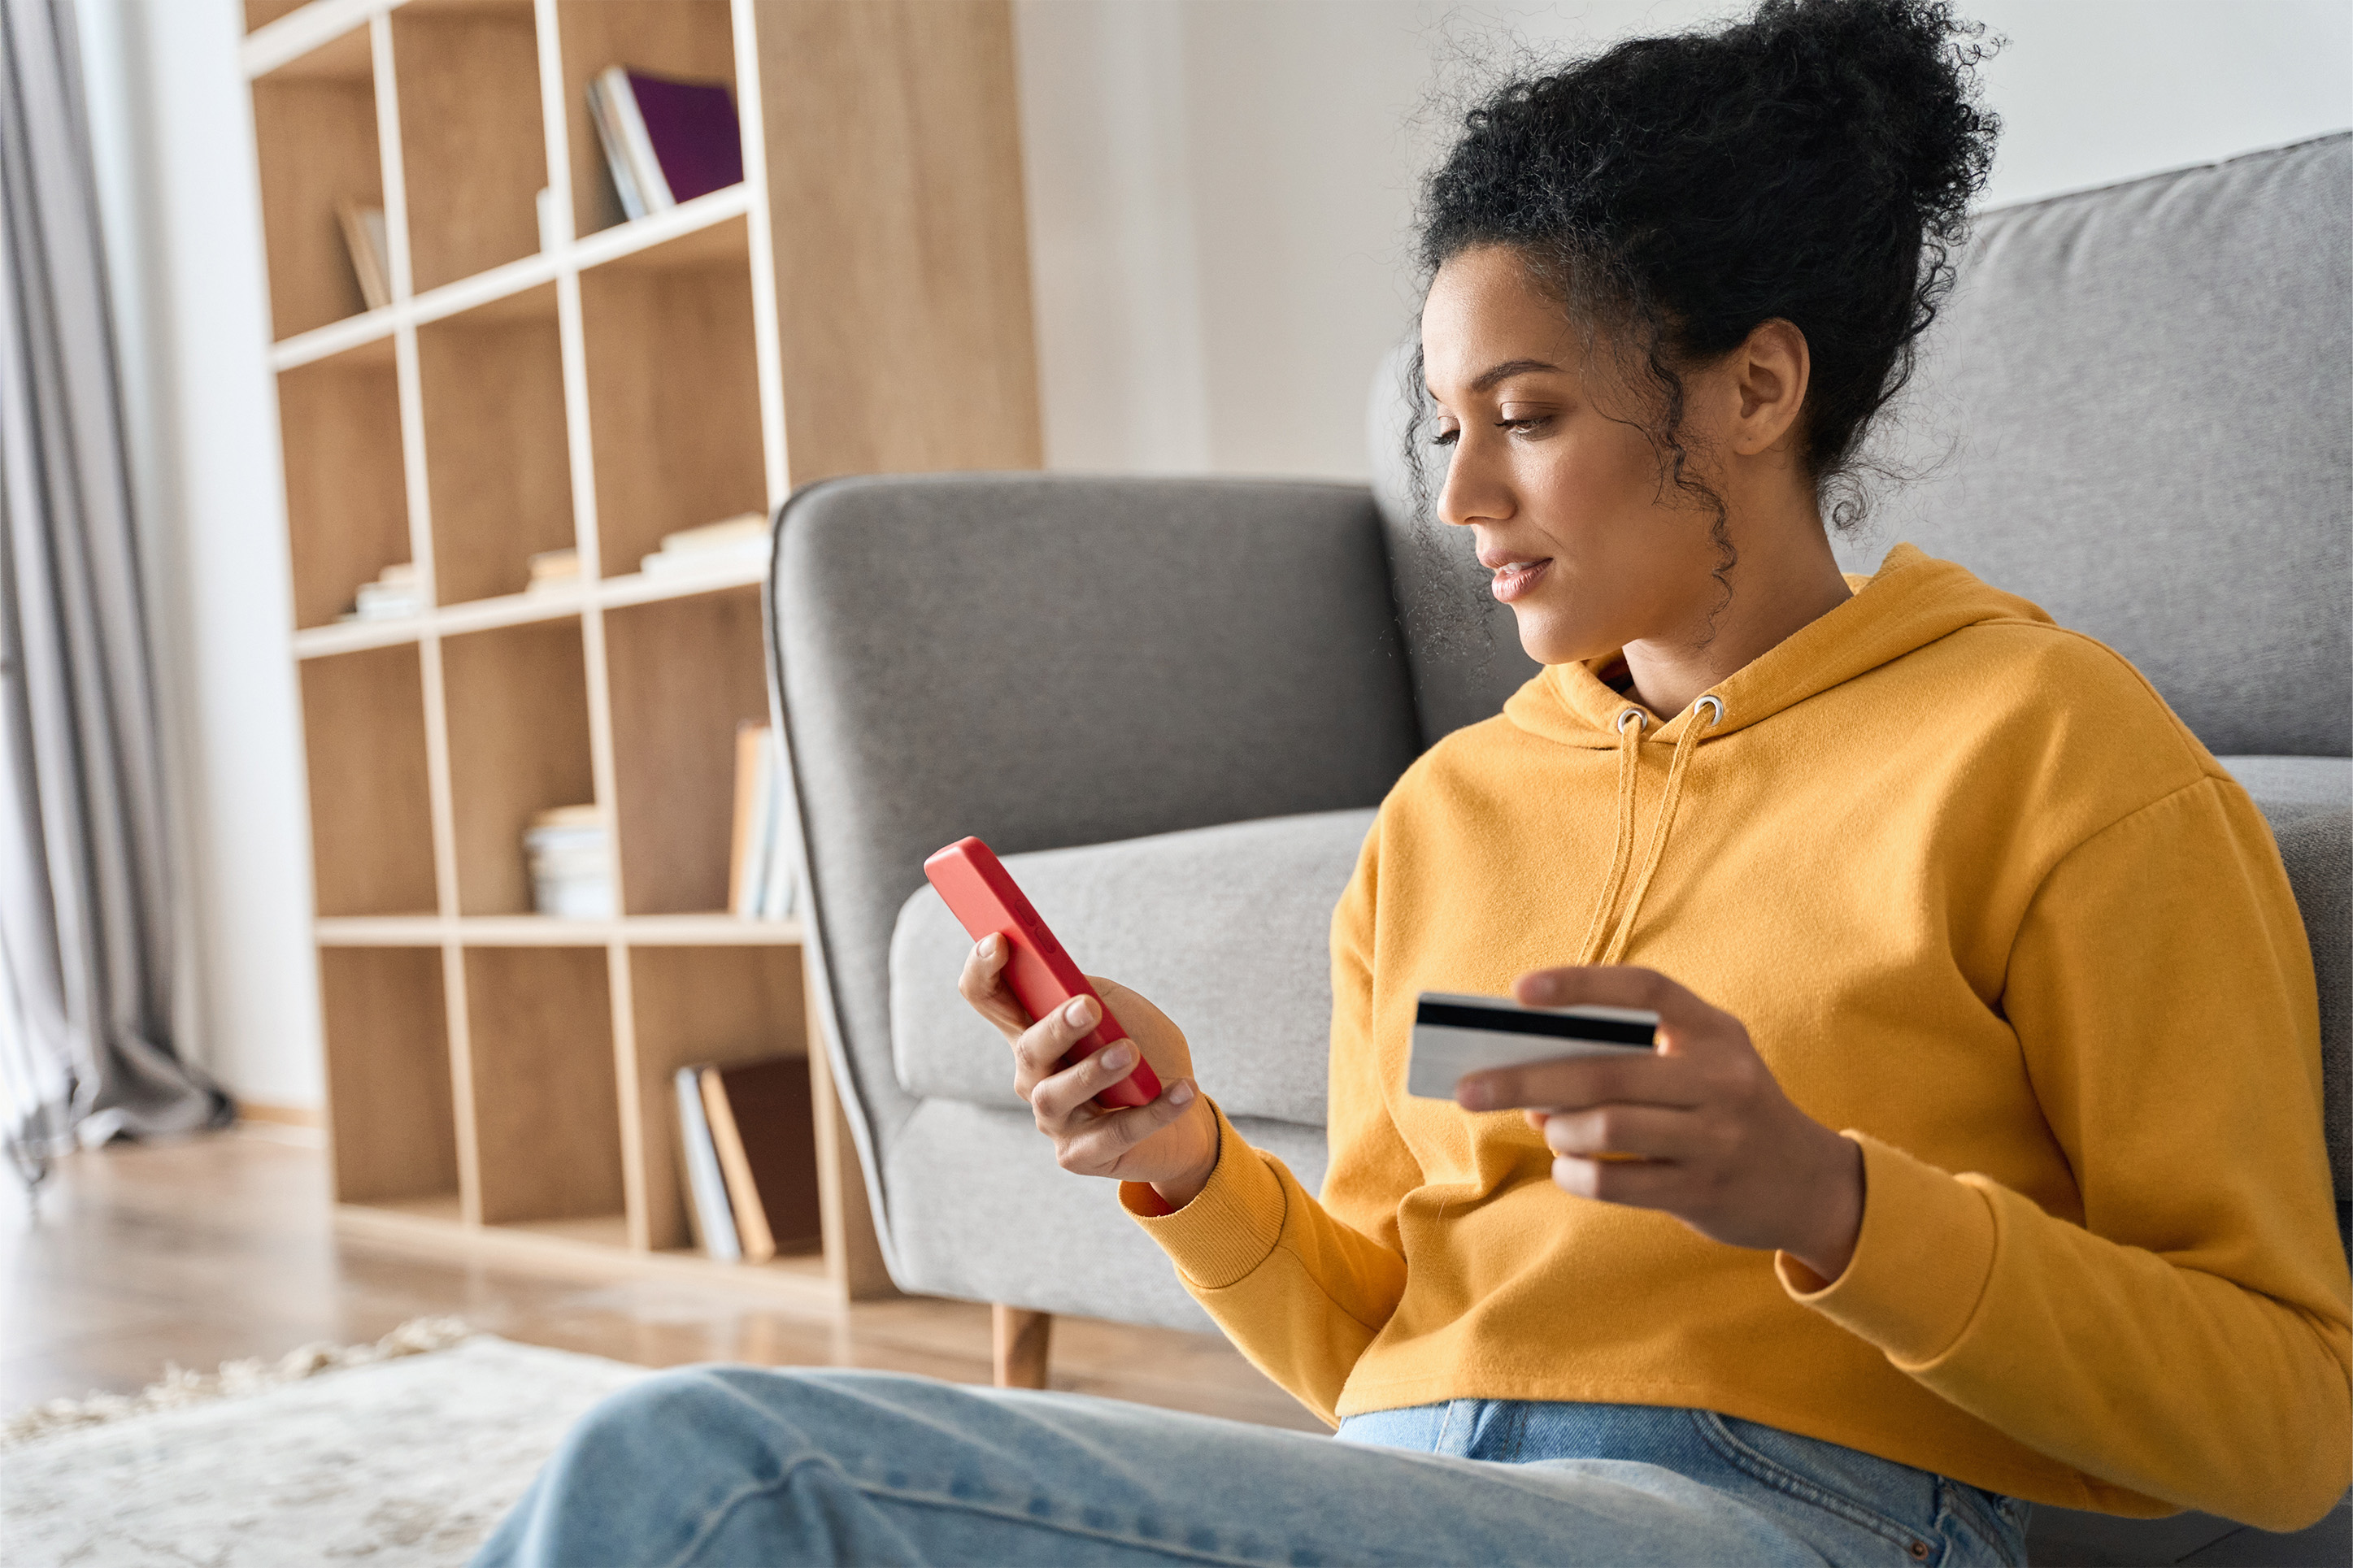 Woman doing banking on her phone while sitting on couch.